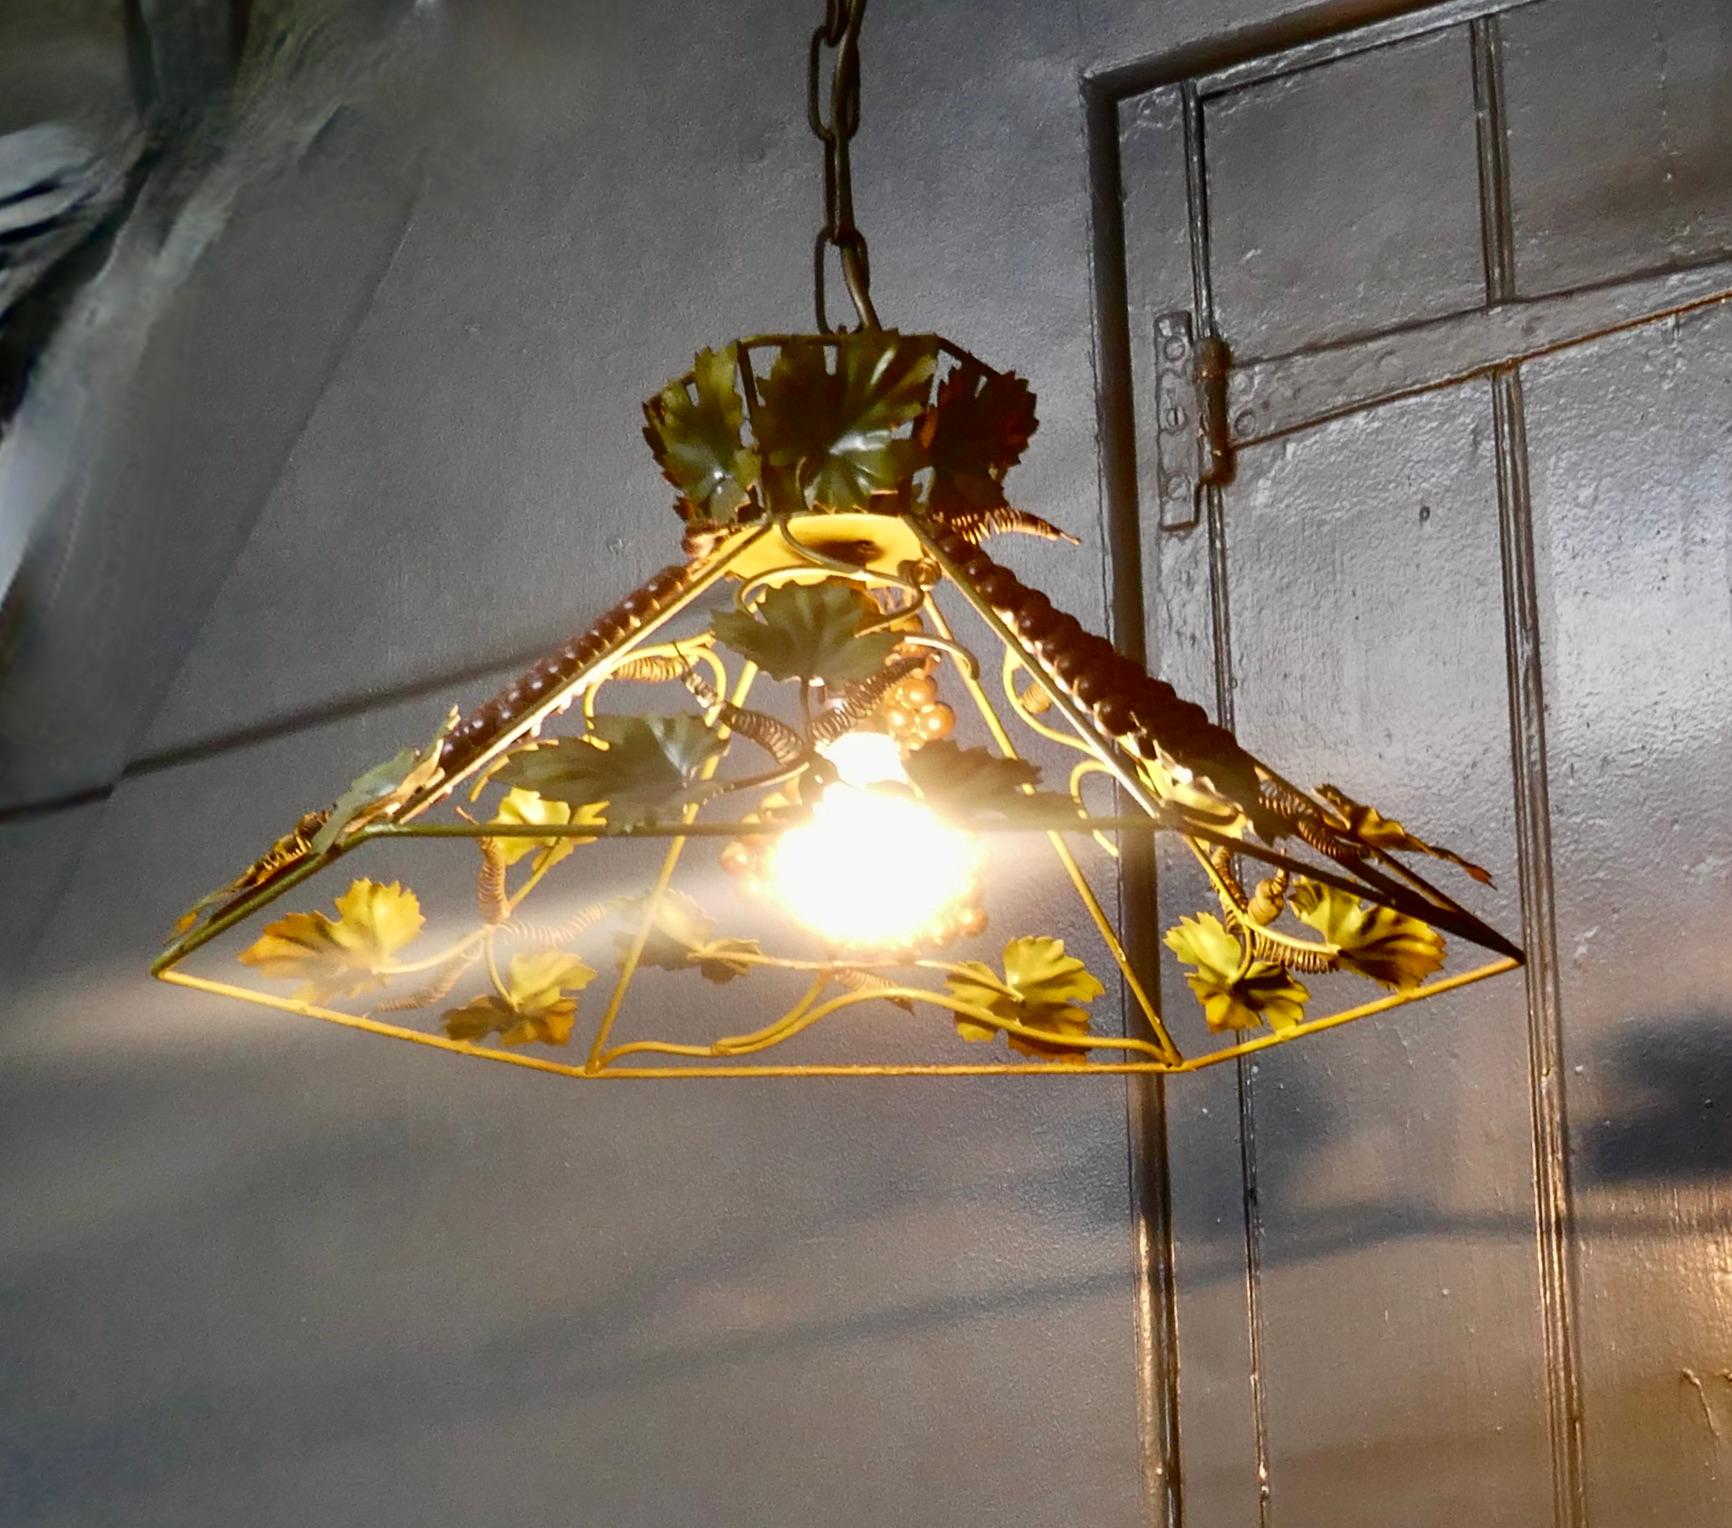 A French Toleware Bistro ceiling light, decorated with vines

This is a very decorative 6 sided ceiling light, the light it is decorated with Vine Leaves and bunches of Grapes 
This is a very unusual wall light, it is made in French Toleware,